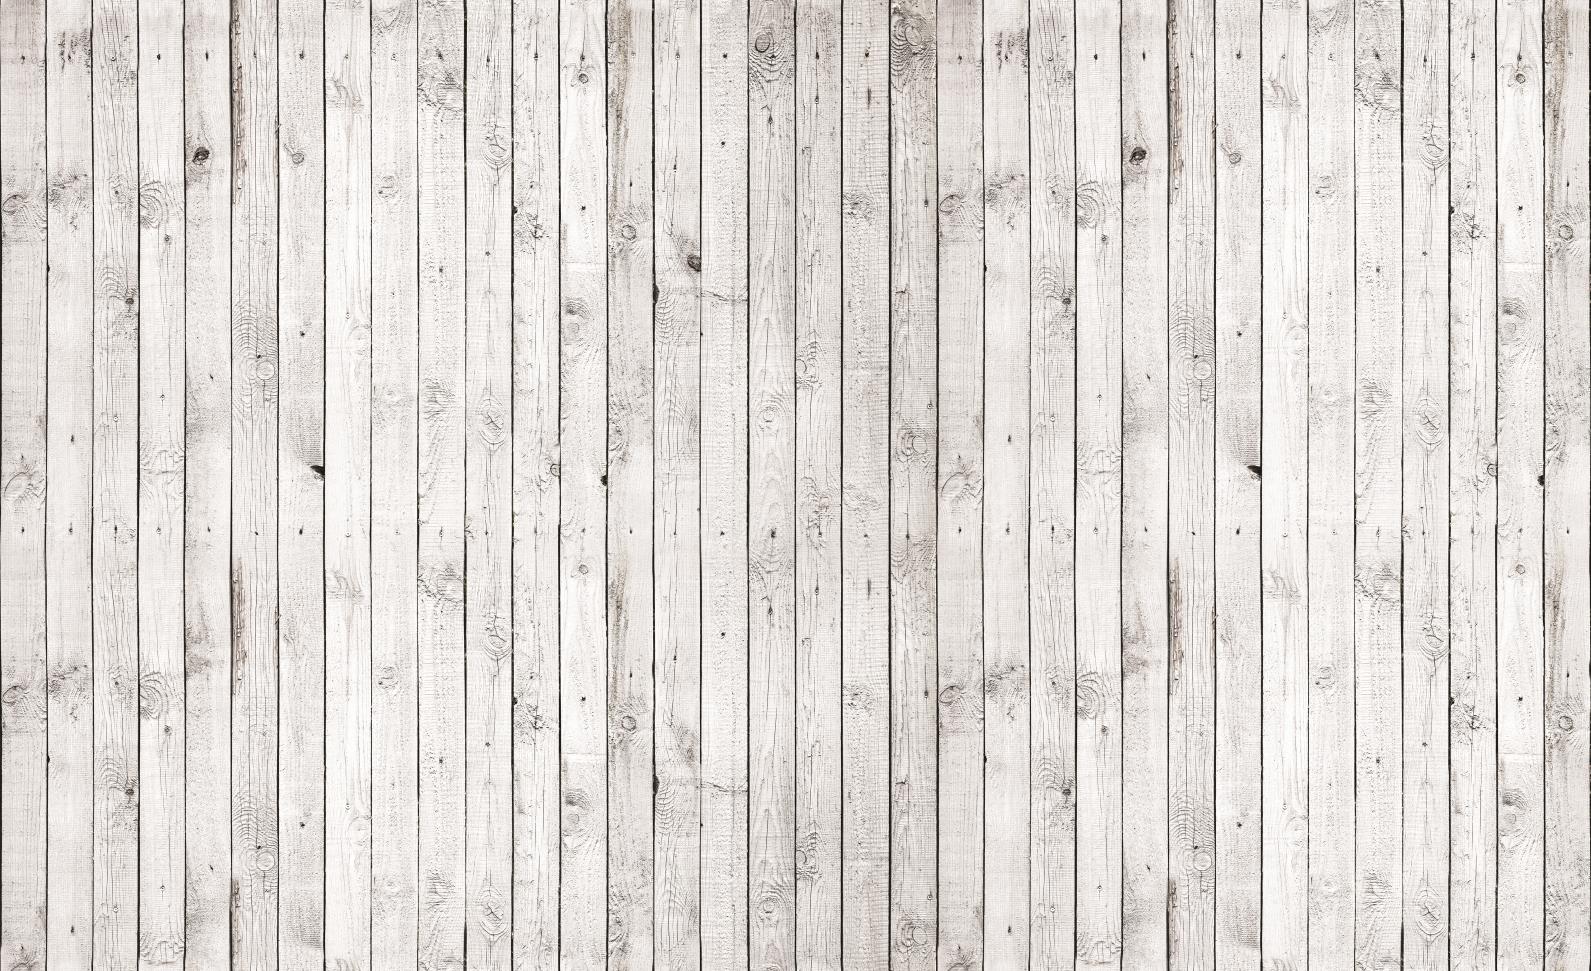 Wood Planks Texture Photo Wallpaper Wall Mural Room 1013p